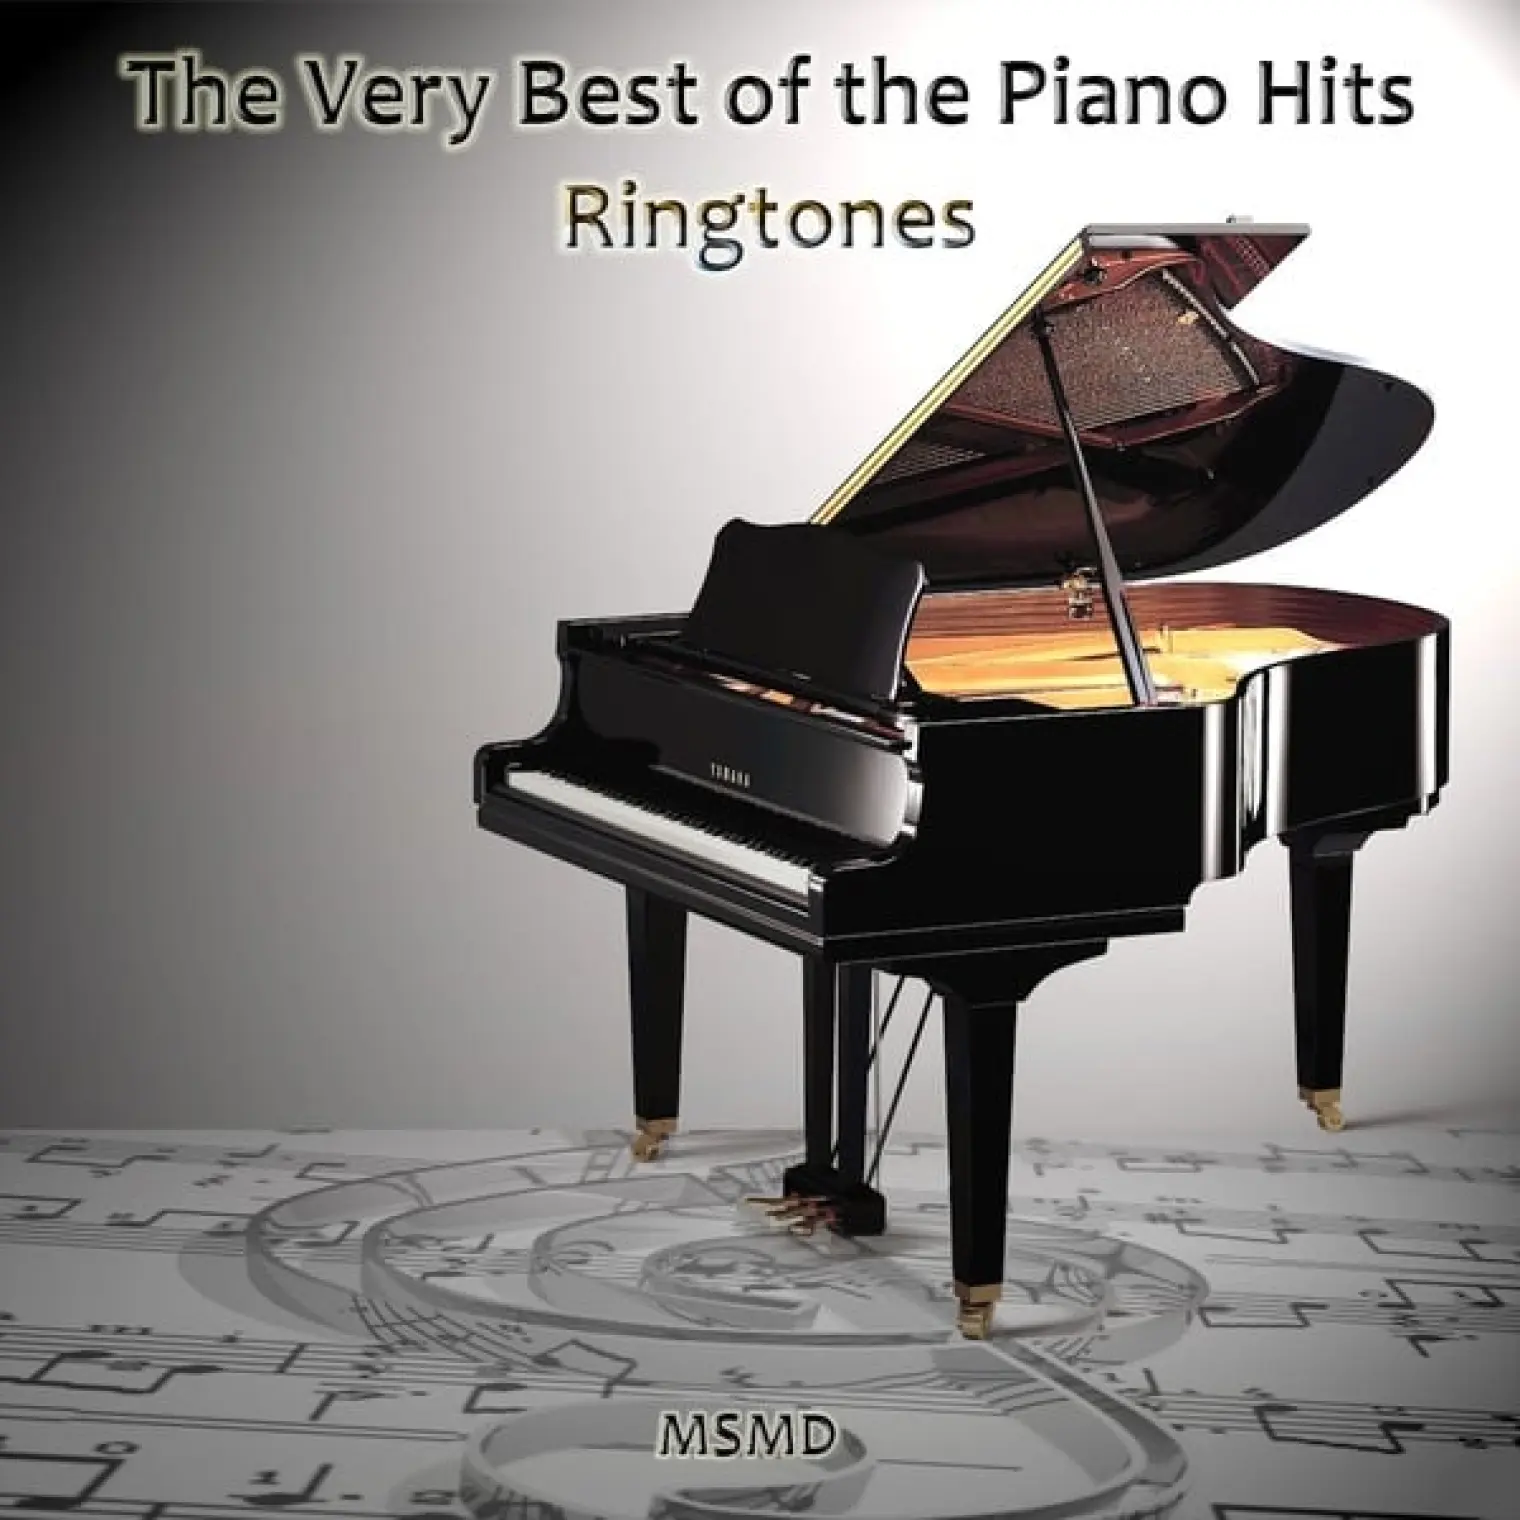 The Very Best of the Piano Hits Ringtones -  Msmd 